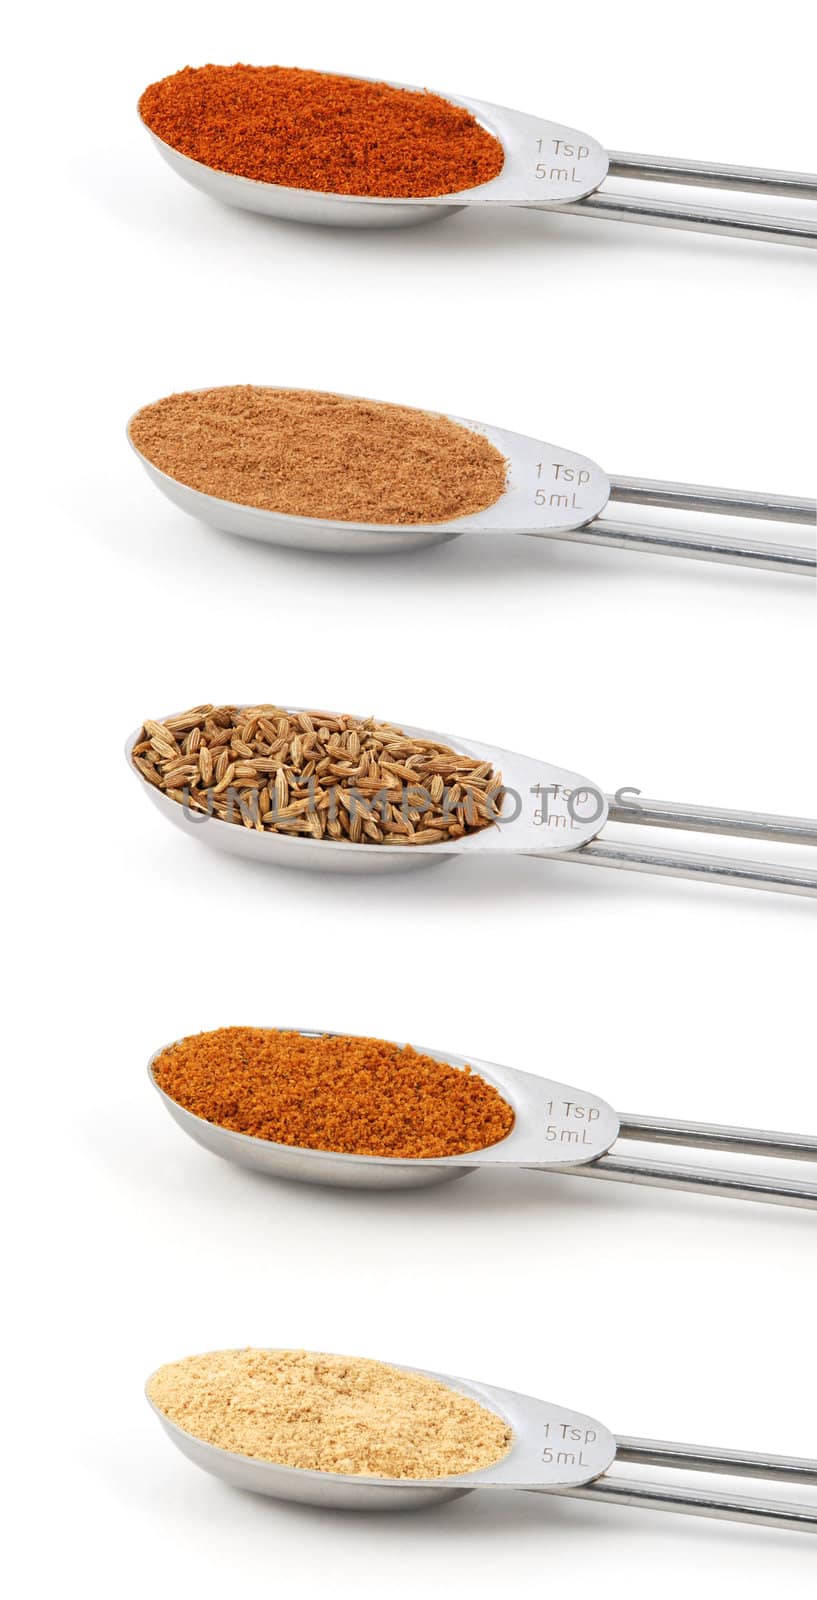 Spices measured in metal teaspoons, isolated on a white background: paprika, ground cinnamon, whole cumin seeds, ground mace and ground ginger.